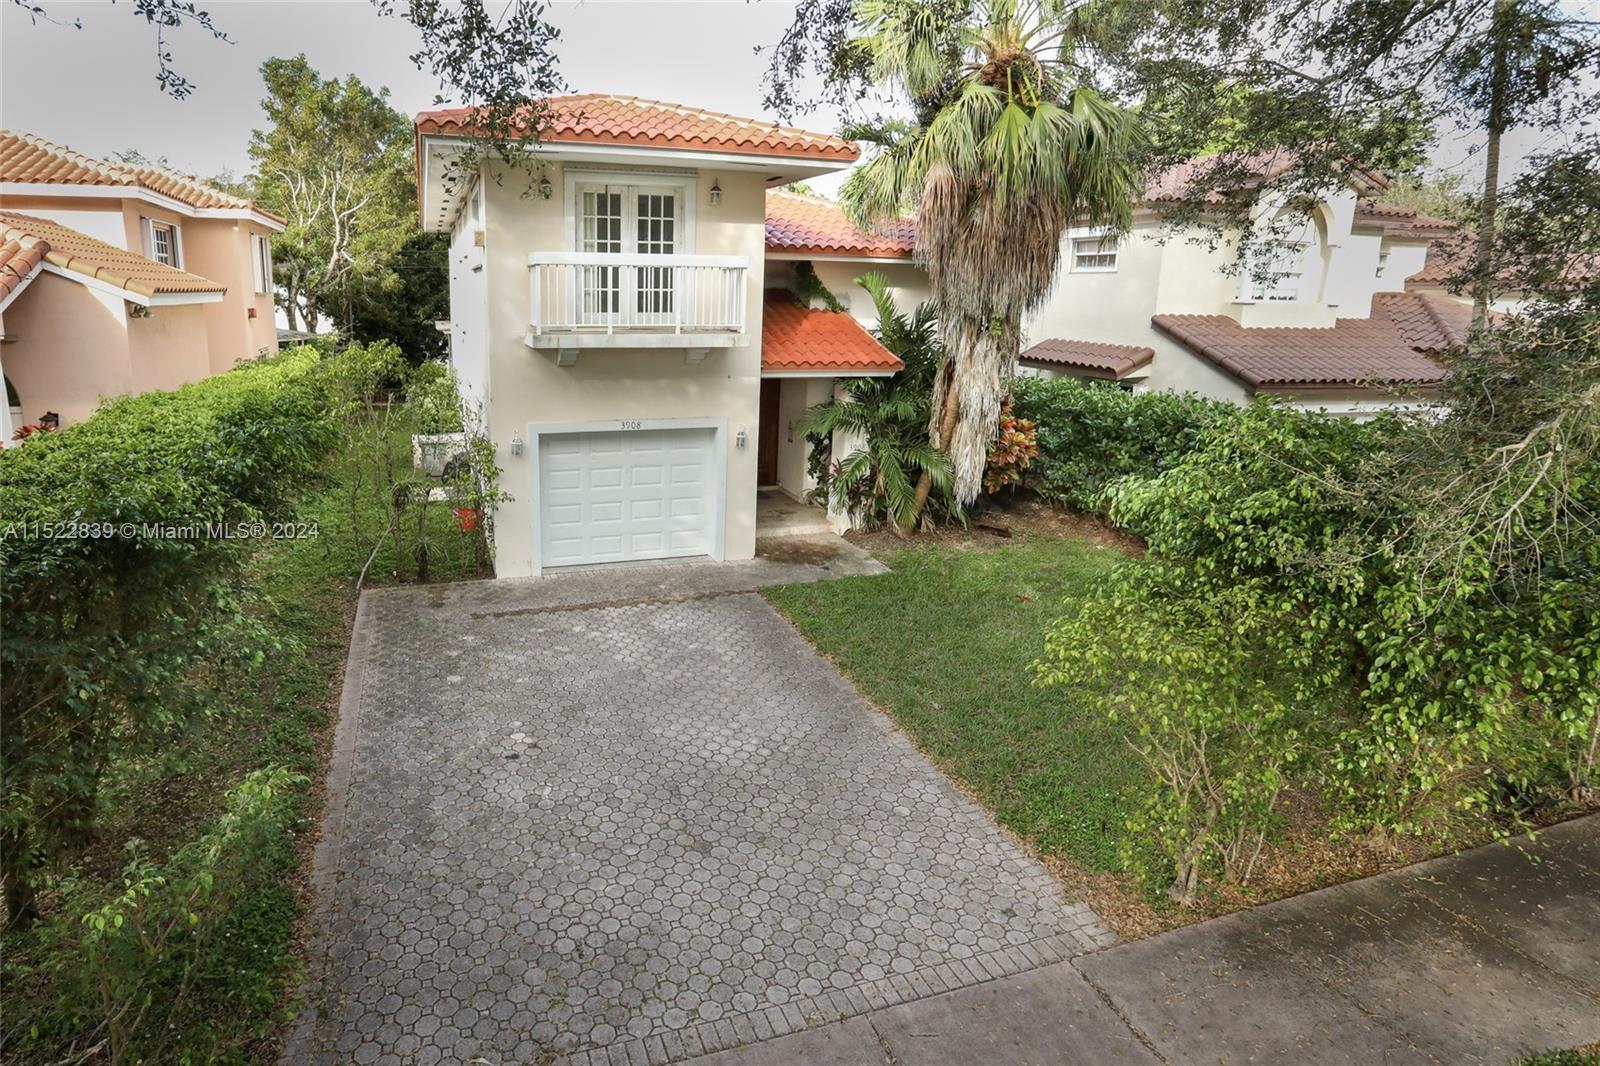 Photo of 3908 Anderson Rd in Coral Gables, FL